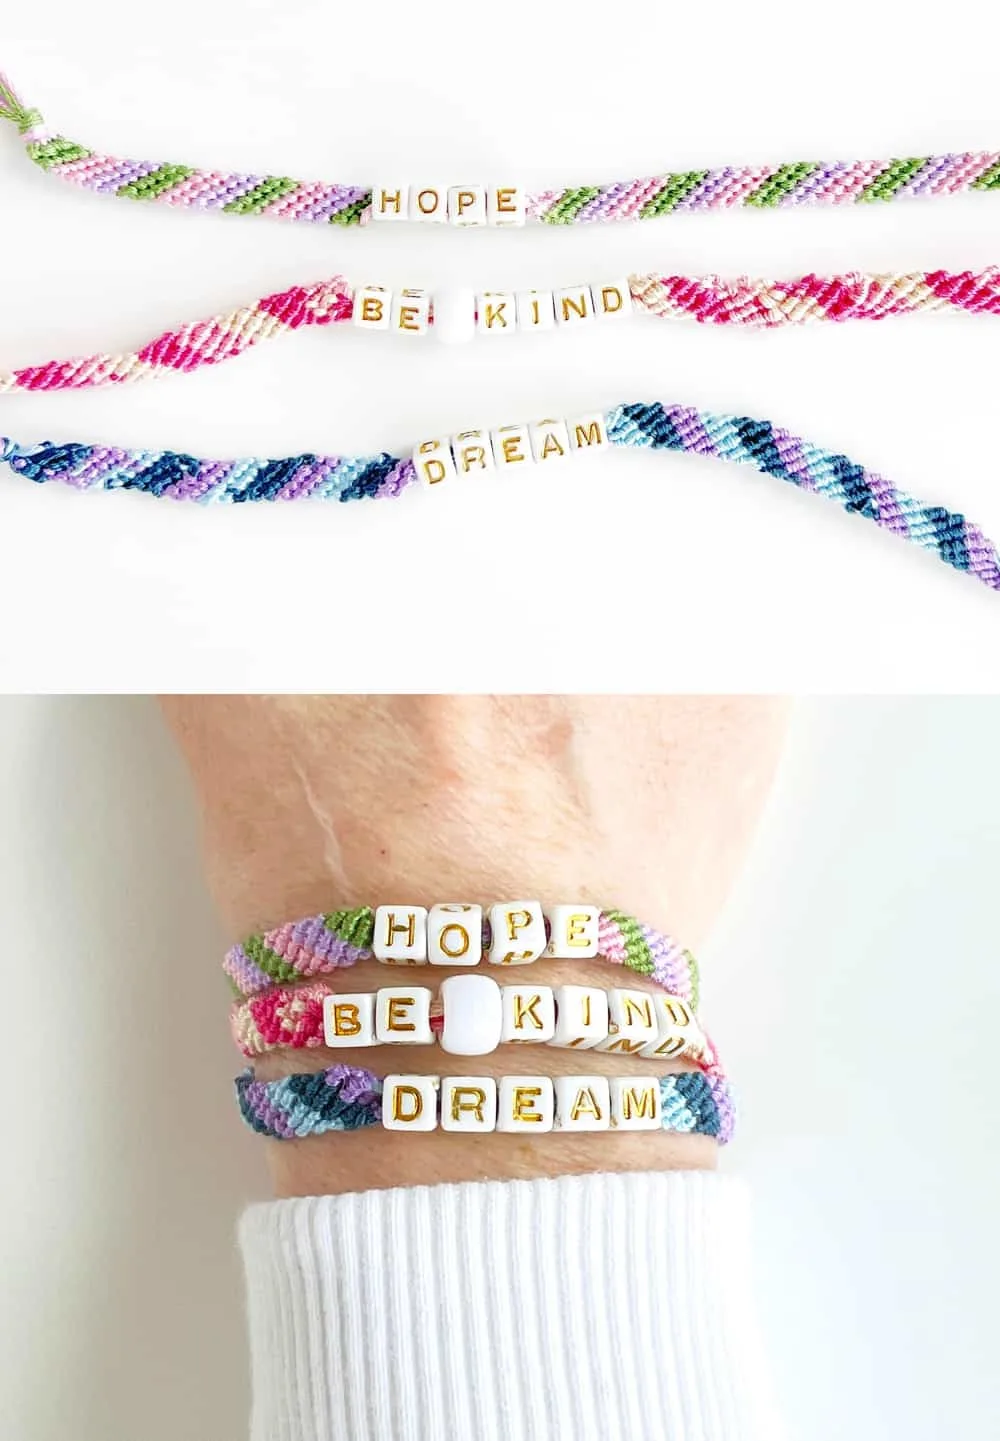 How to Make a Simple Friendship Bracelet With Letters Beads : 7